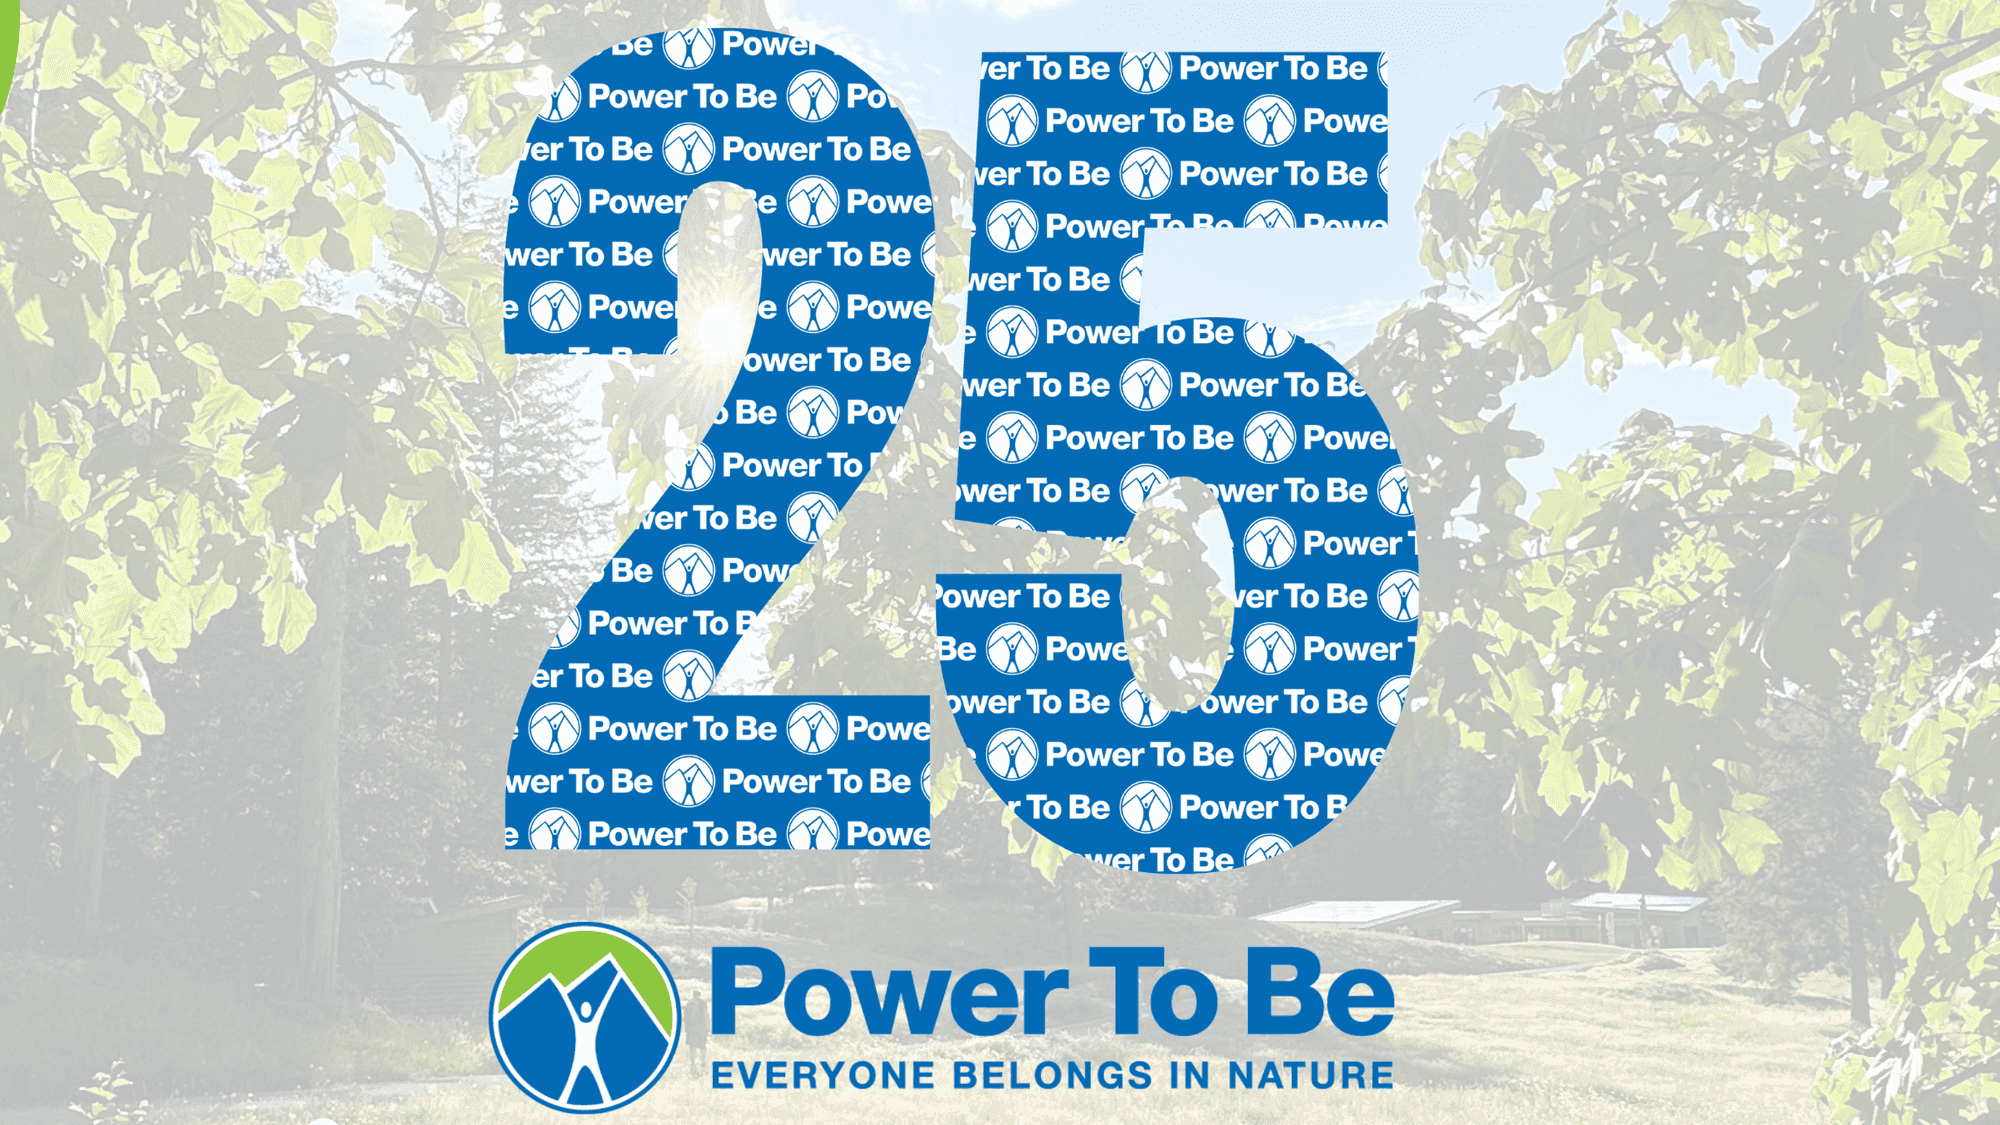 Power To Be's #JourneyTo25